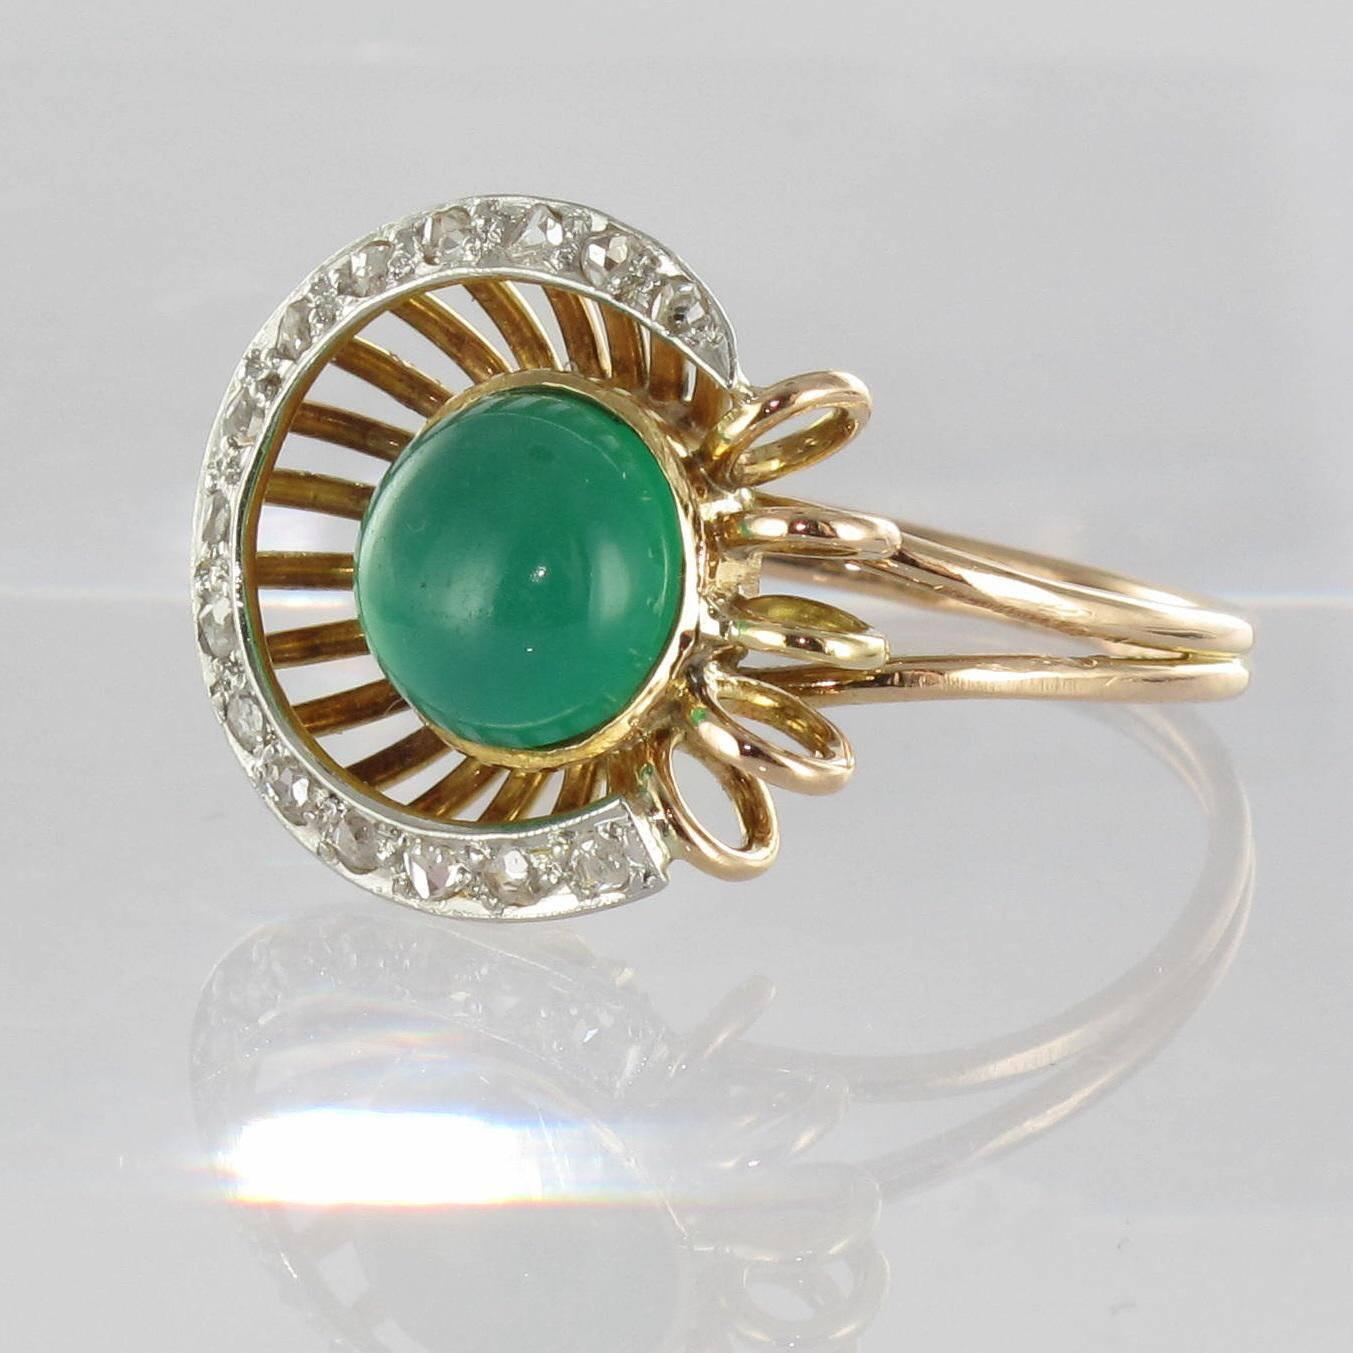 Ring in platinium and 18 carat rose gold, owl and grotesque hallmarks. 
An asymmetric antique ring composed of rose gold strands that combine at the base to hold a bezel set green agate cabochon surrounded by a platinum crescent moon set with 16